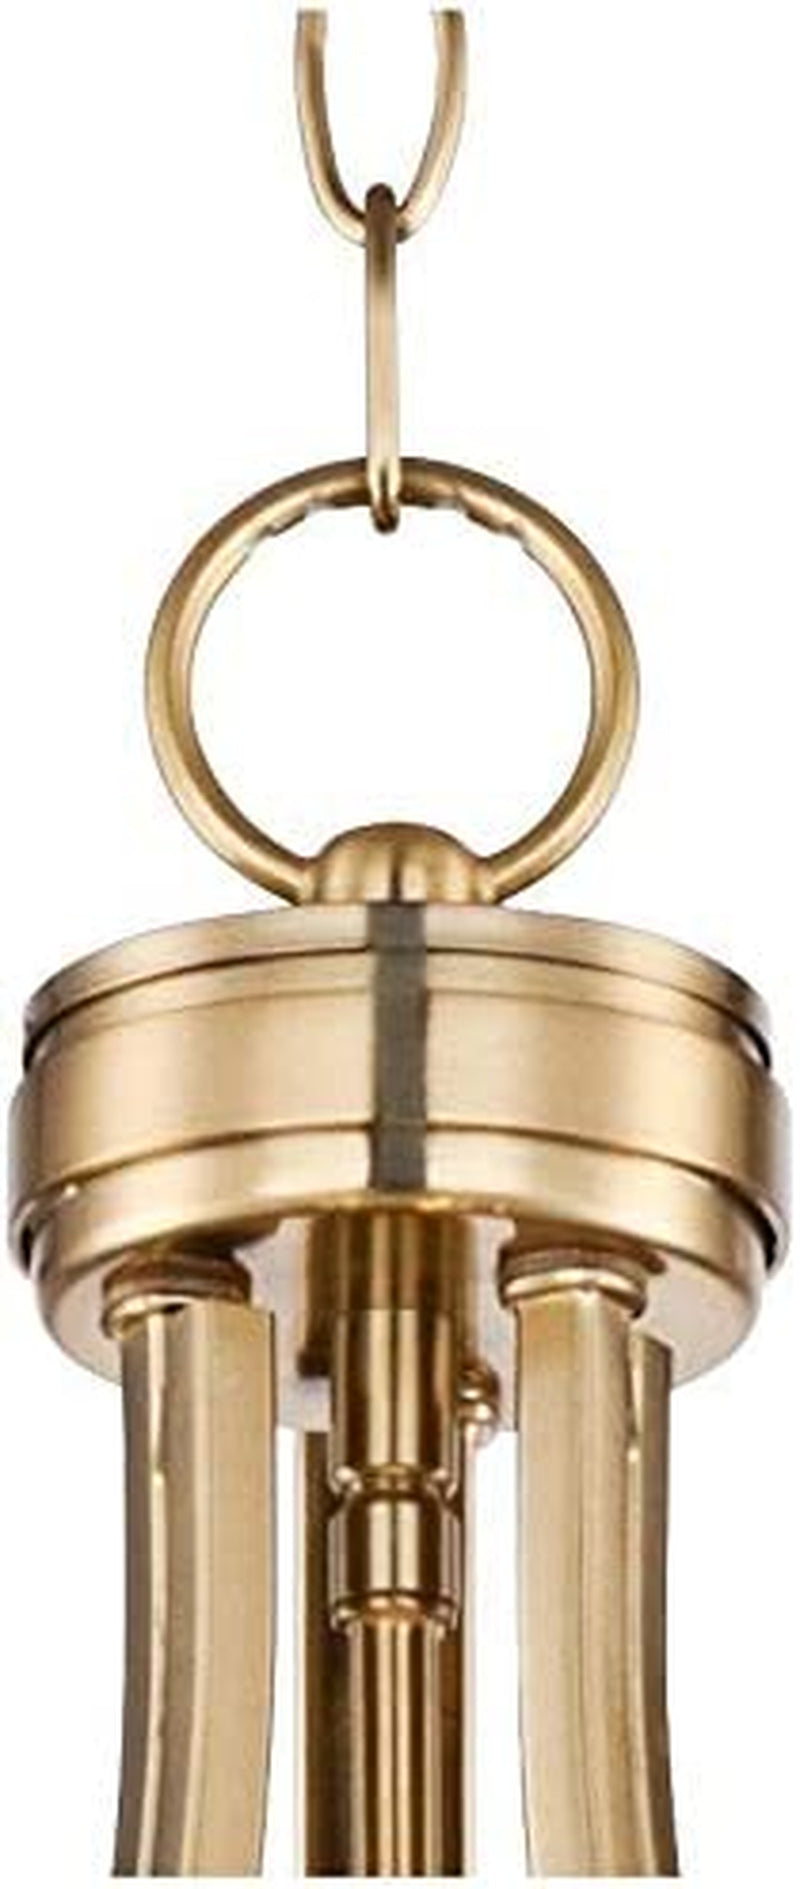 Deco Warm Brass Gold Bowl Small Pendant Chandelier Light Fixture 21 1/2" Wide Satin White Glass for Dining Room House Foyer Entryway Kitchen Bedroom Living Room High Ceilings - Possini Euro Design Home & Garden > Lighting > Lighting Fixtures Lamps Plus   